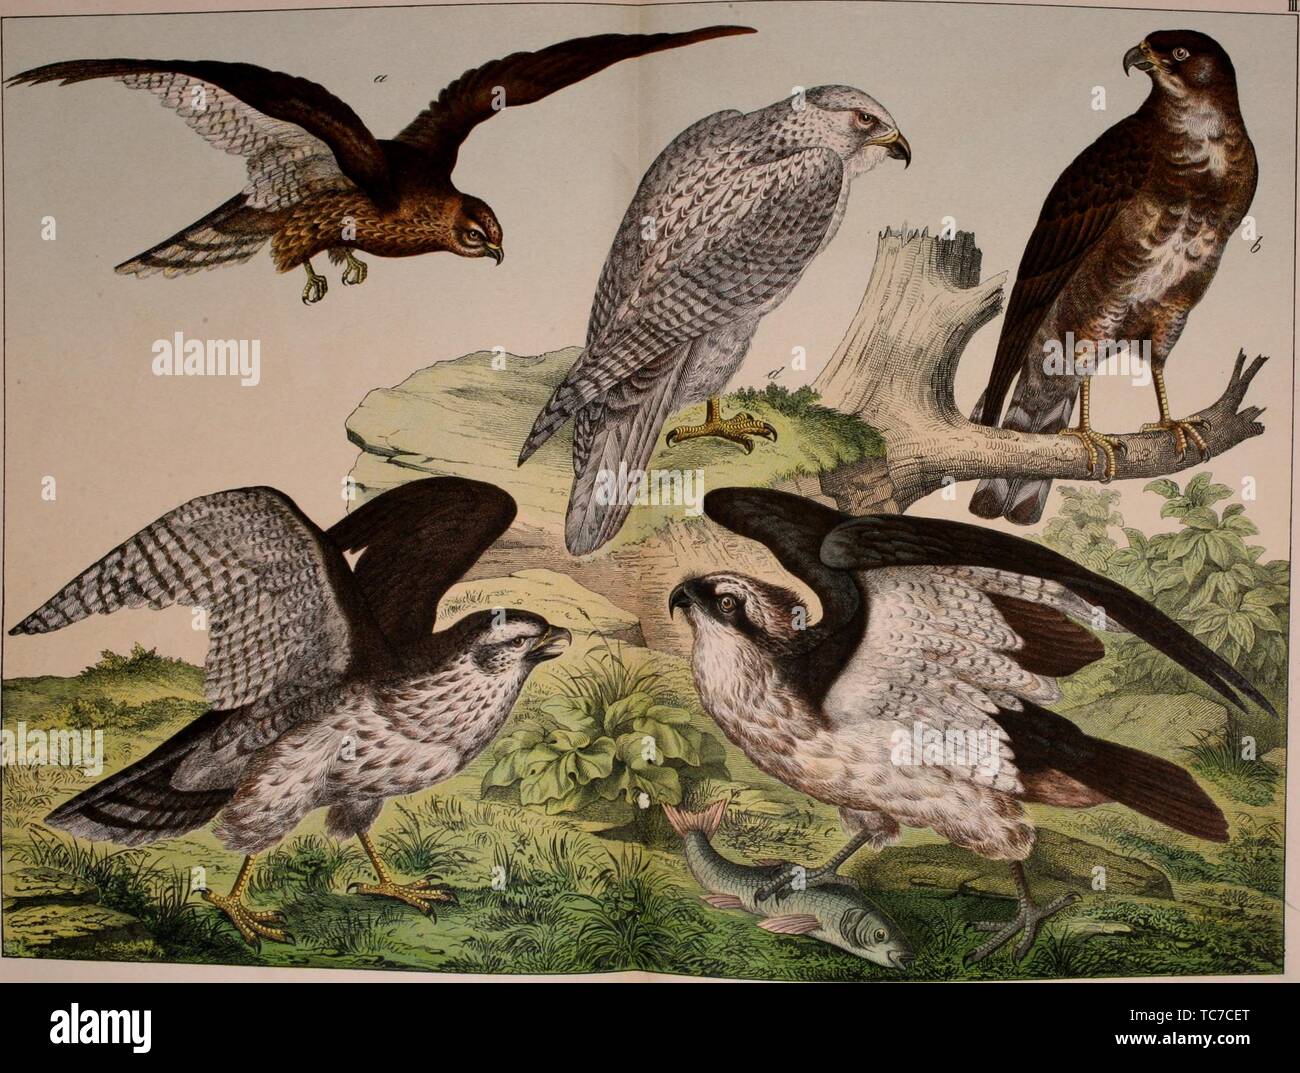 Engraved drawing of birds of prey, Montagu's Harrier (Circus pygargus), Buzzard (Buteo vulgaris), Osprey (Pandion haliaetus), Gyrfalcon (Falco rusticolus), and Goshawk (Astur falumbarius), from the book 'Natural history of the animal kingdom for the use of young people' by William Forsell Kirby, 1889. Courtesy Internet Archive. () Stock Photo